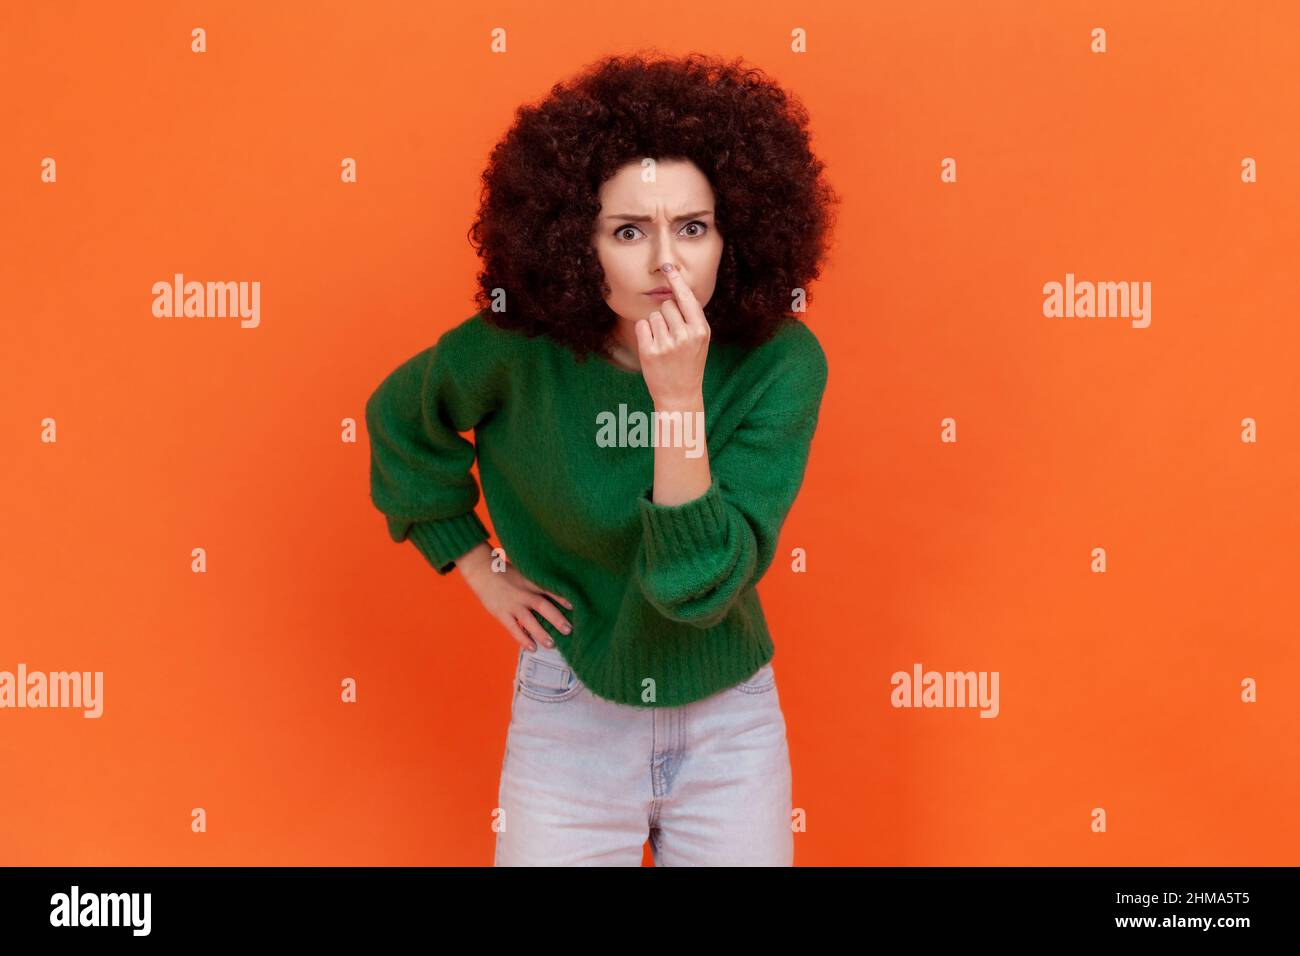 Woman with Afro hairstyle looking with incredulous suspicious gaze and touching nose, gesturing you are liar, suspecting falsehood. Indoor studio shot isolated on orange background. Stock Photo